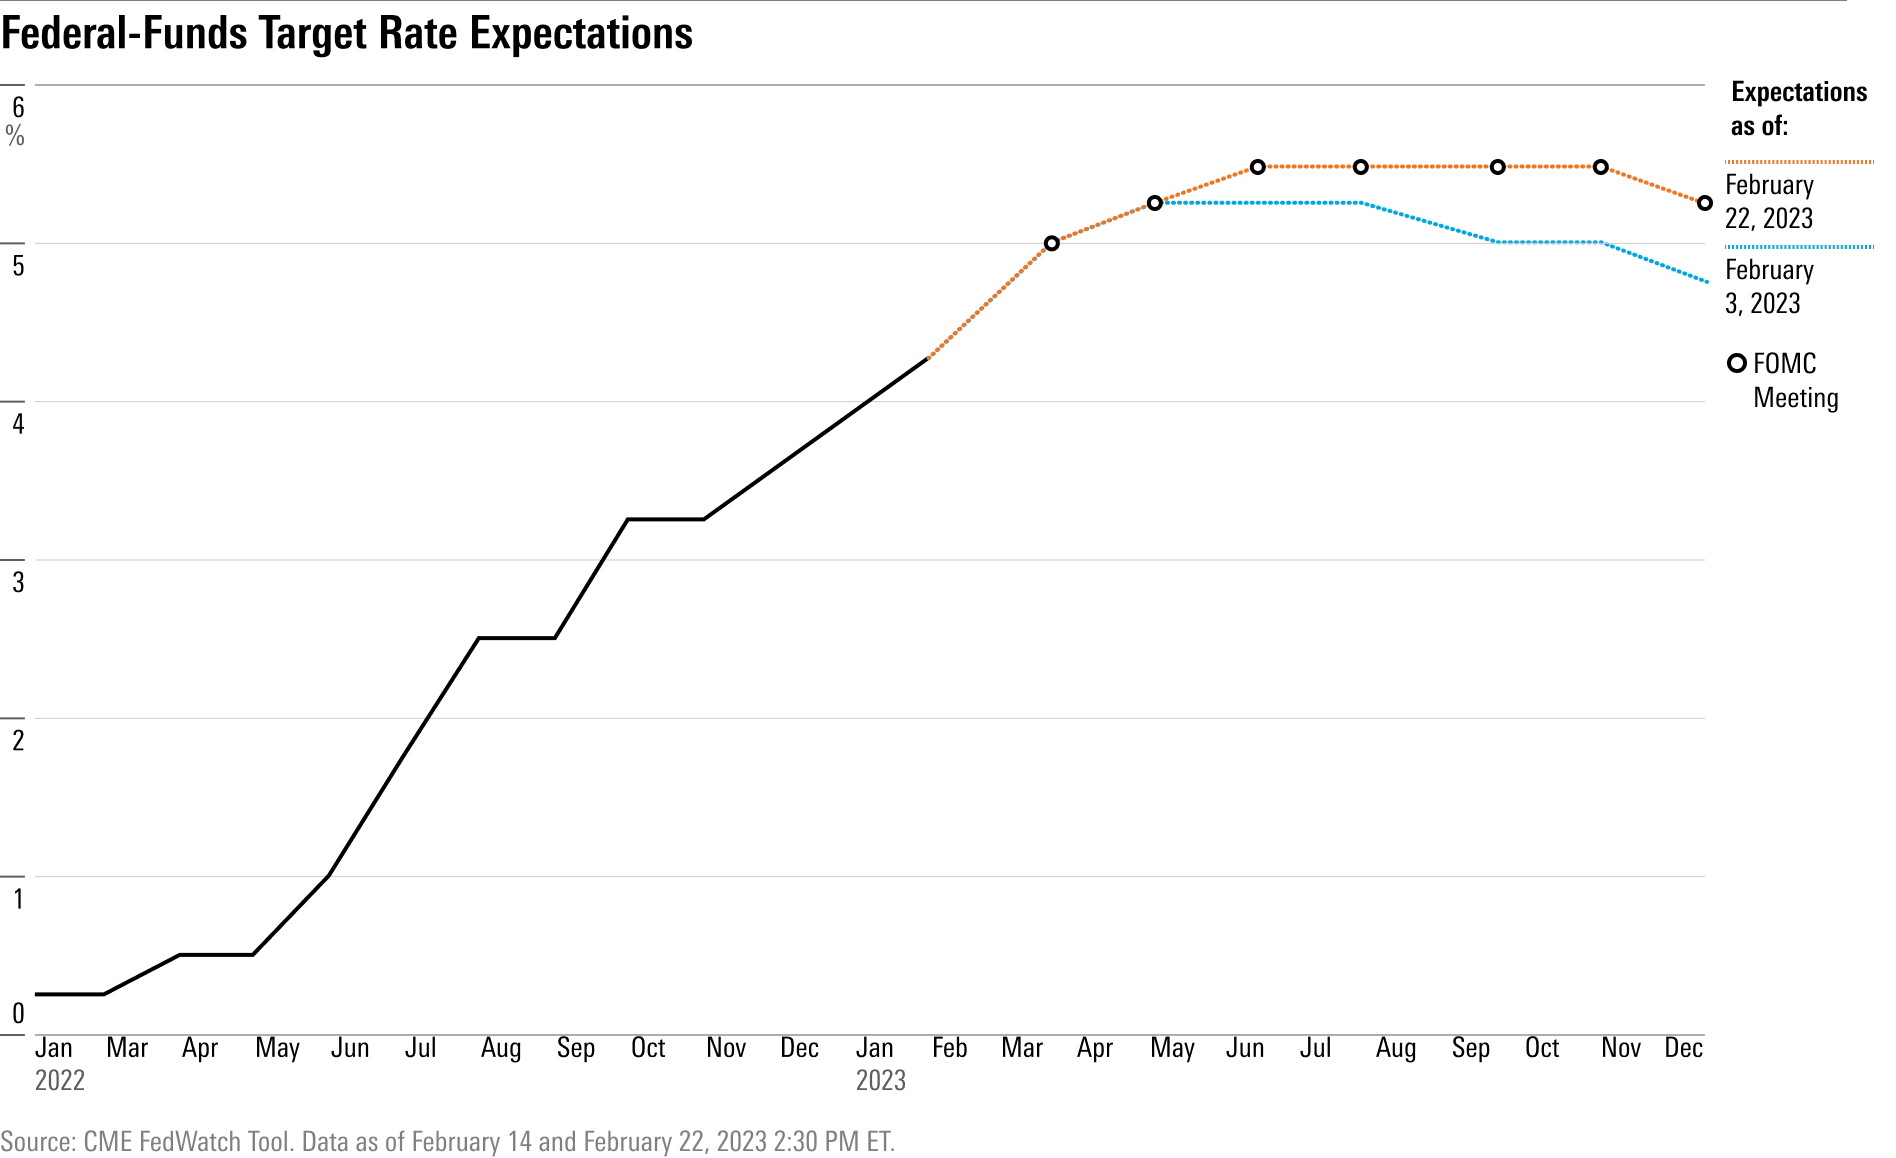 Expectations for Federal-Funds target terminal rates.